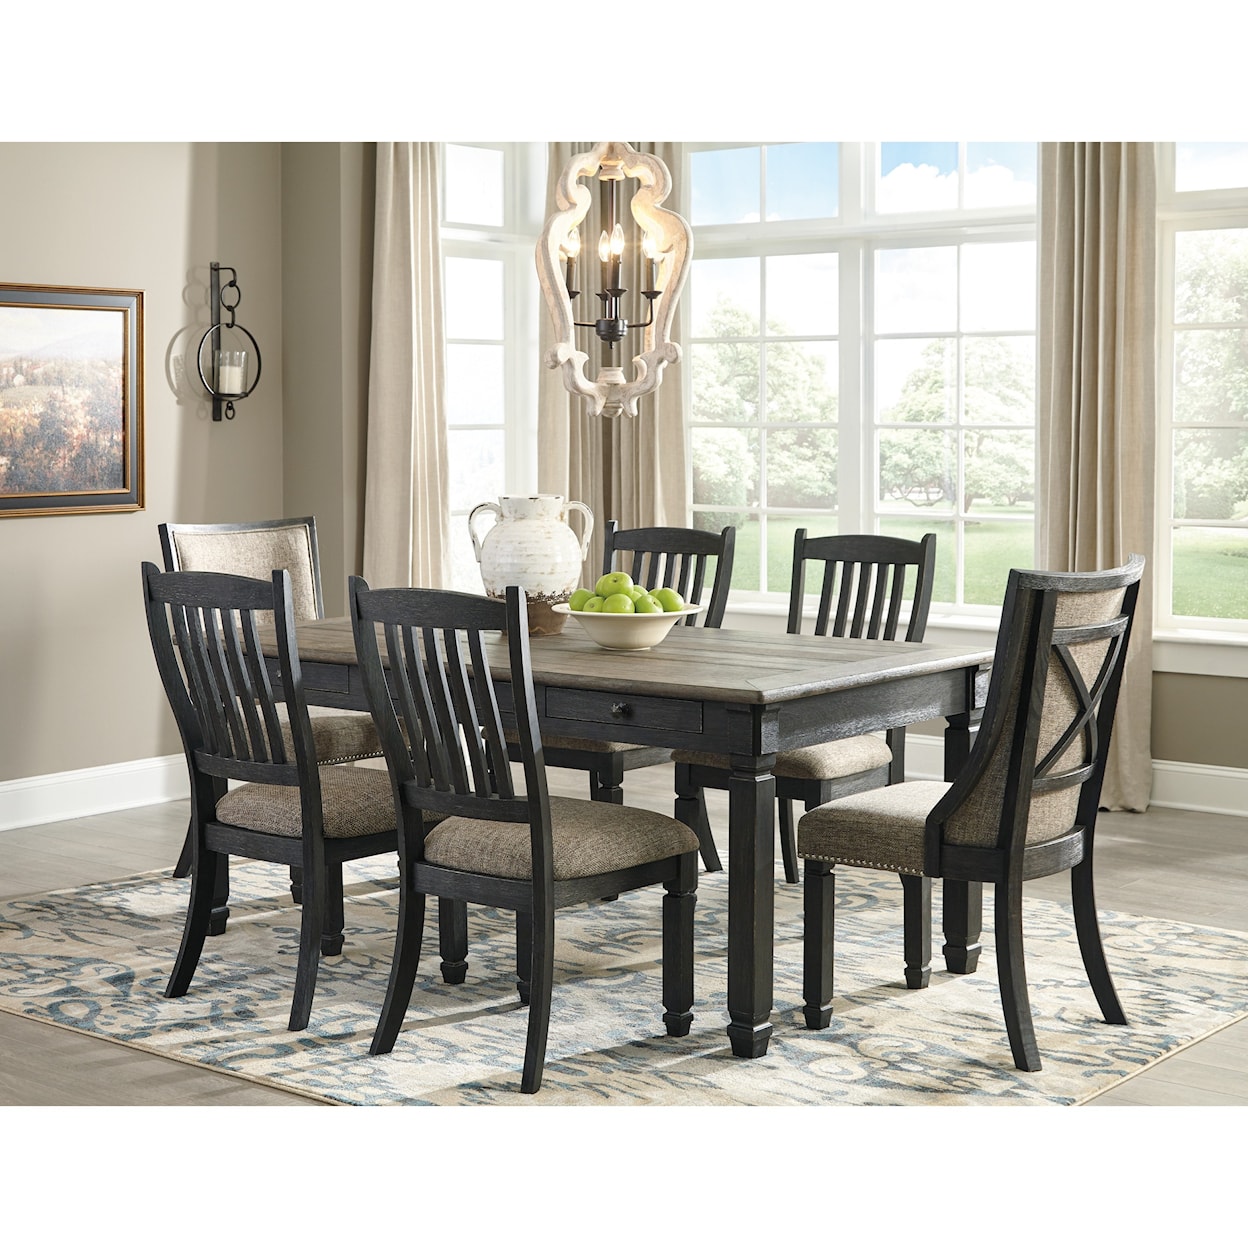 Signature Design Tyler Creek 7-Piece Table and Chair Set